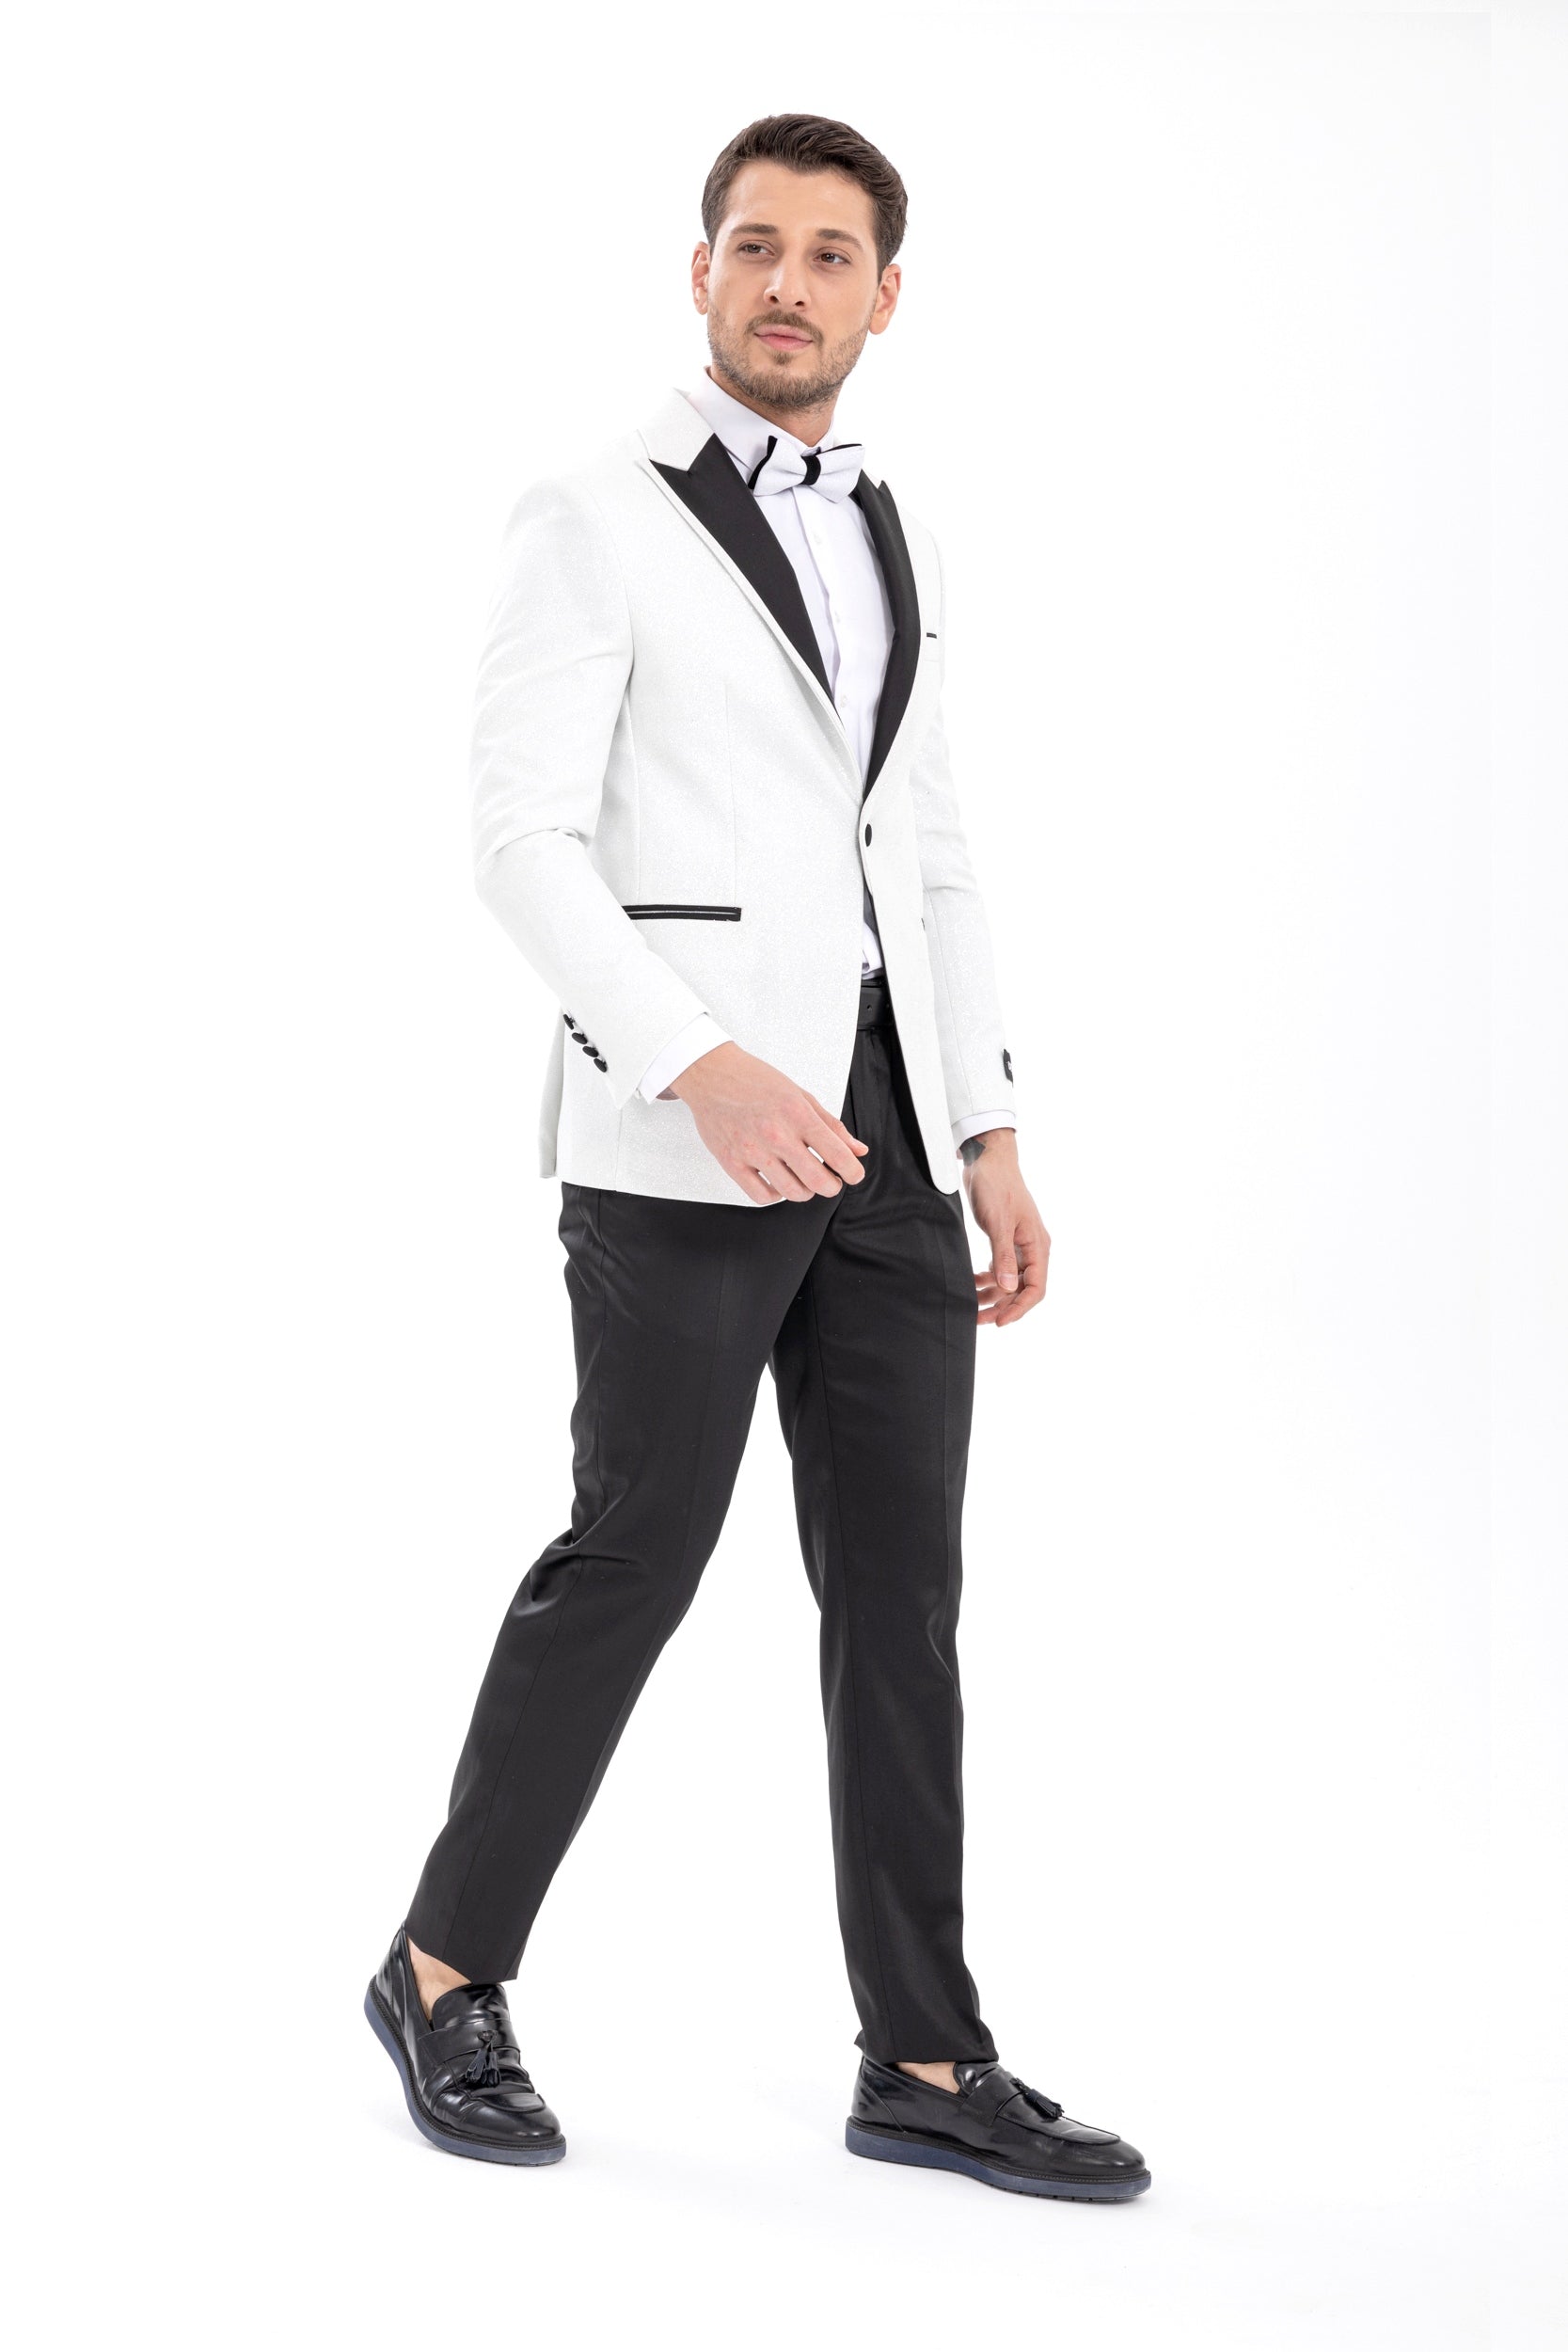 White Pointed Collar Silvery Classic 2 Piece Tuxedo